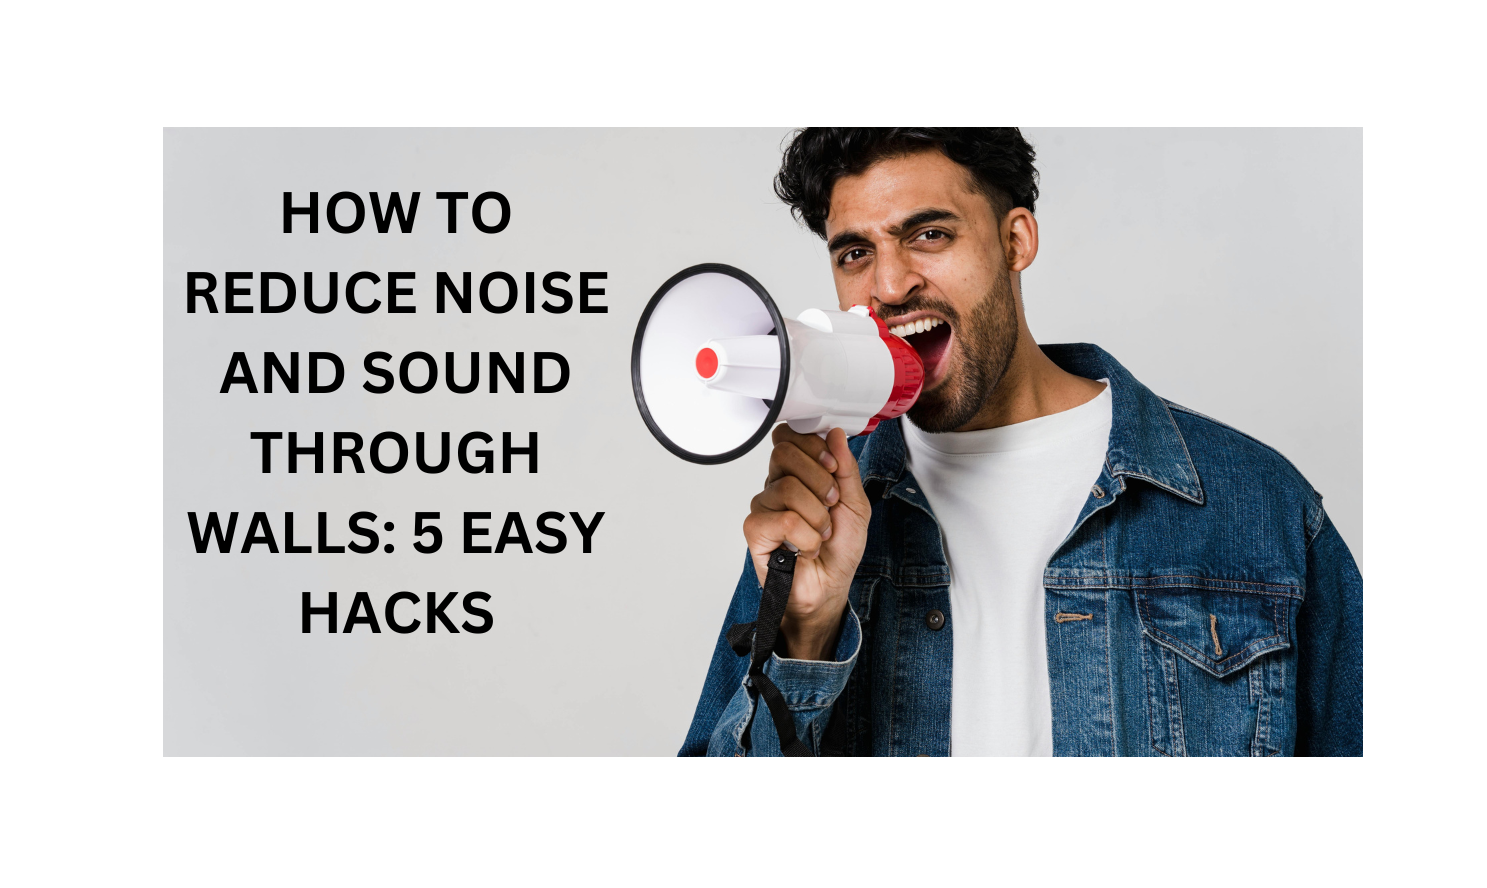 HOW TO REDUCE NOISE AND SOUND THROUGH WALLS